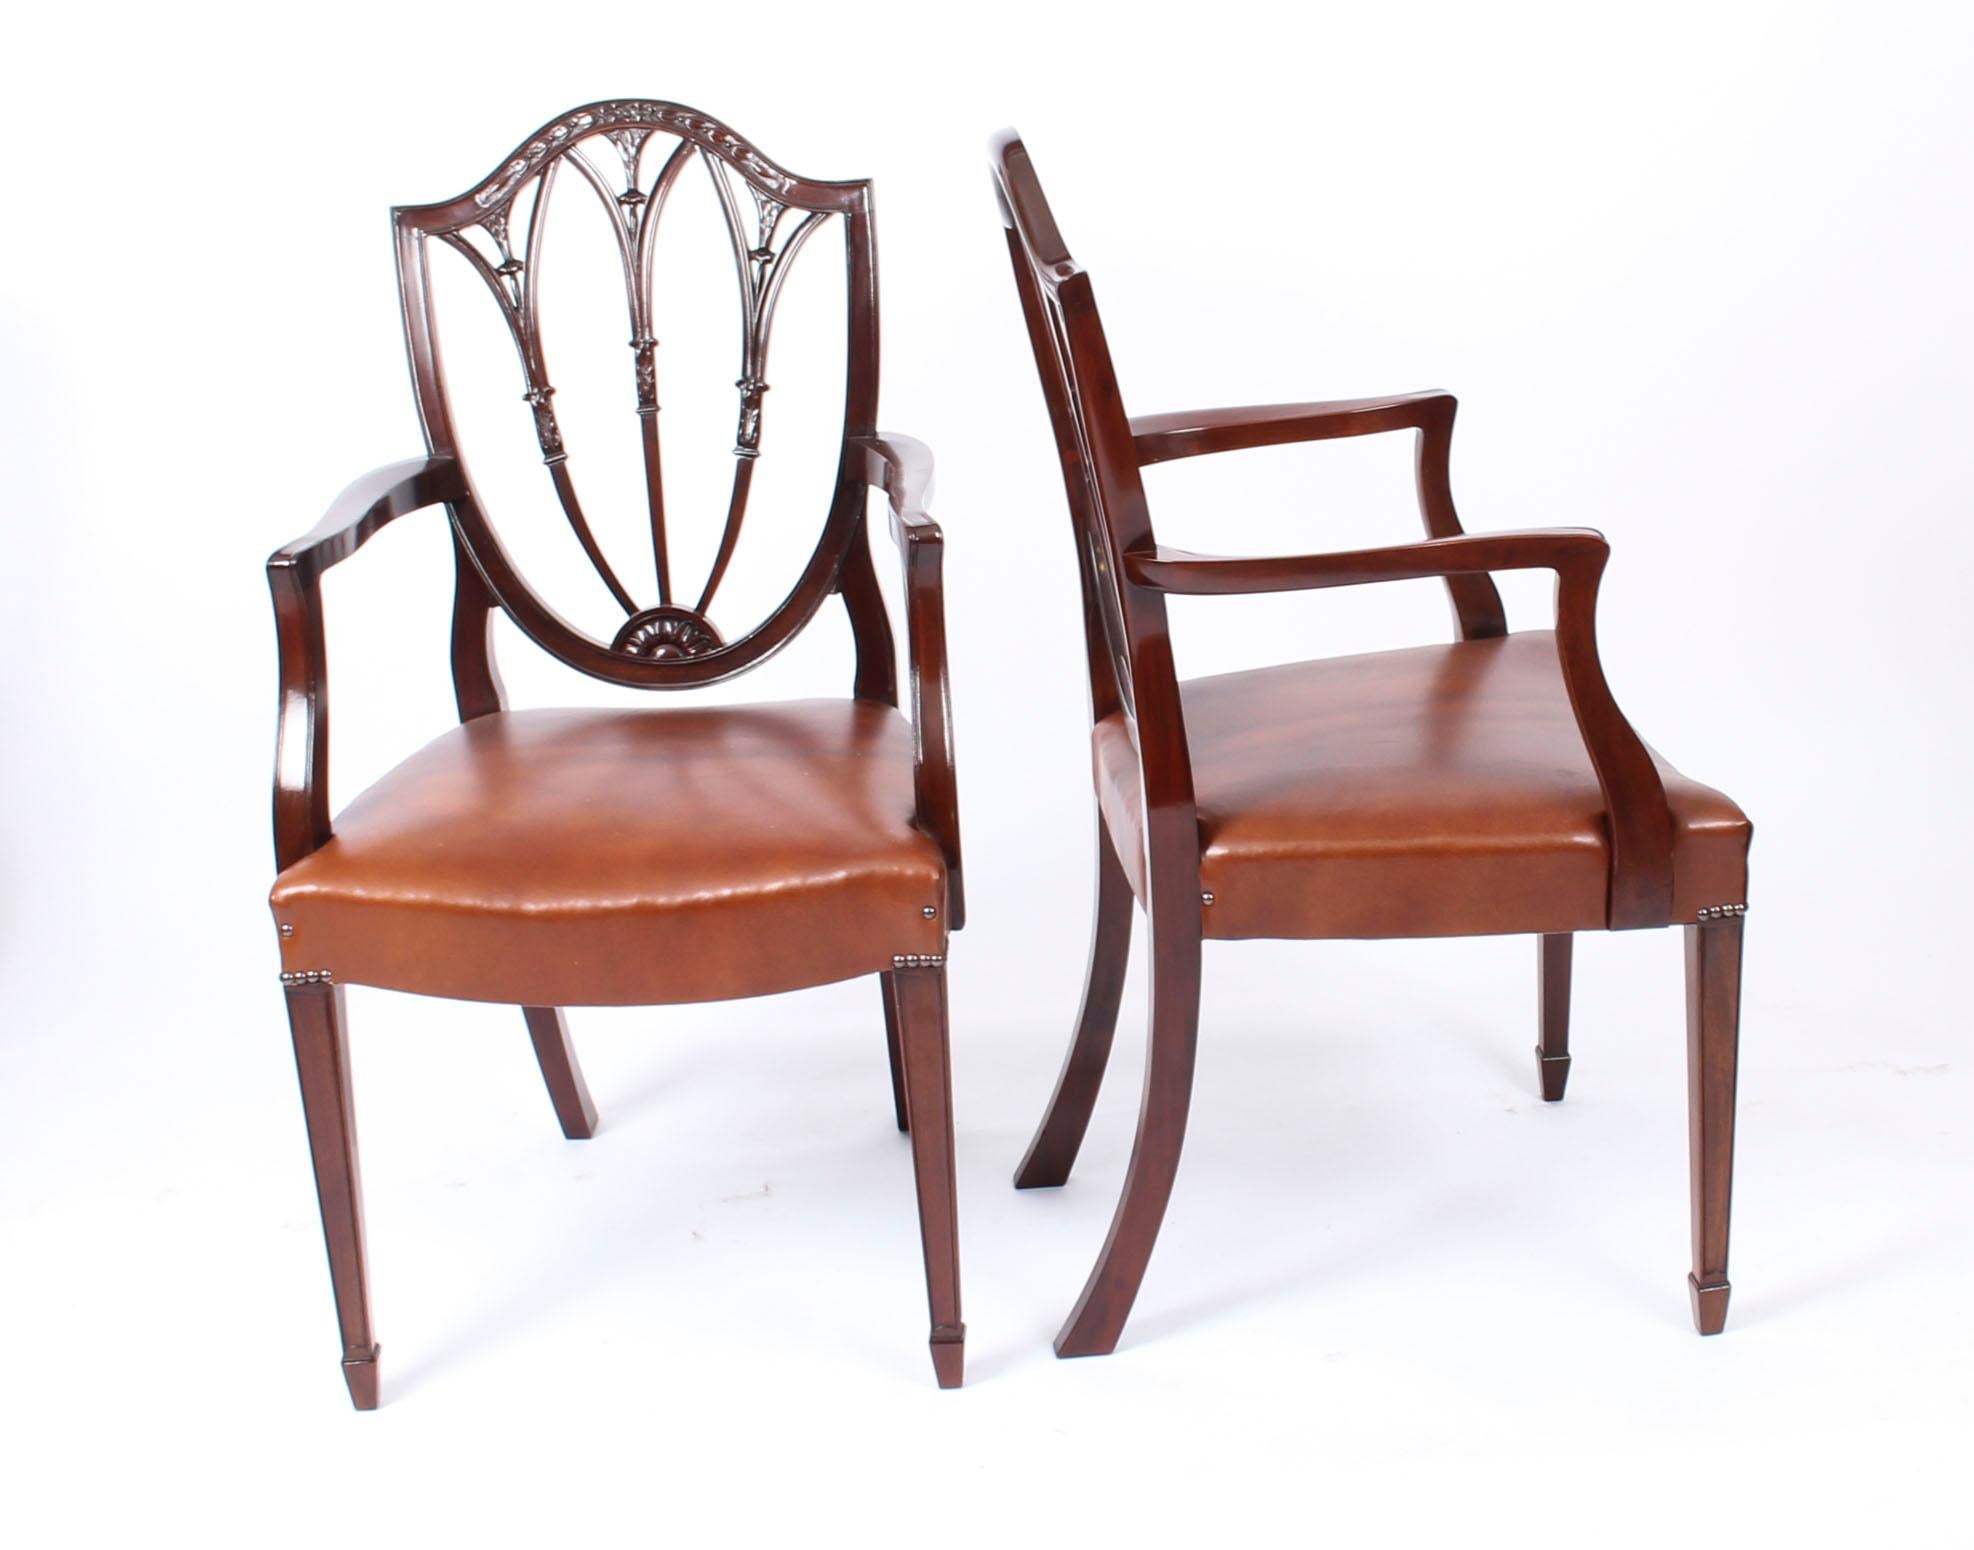 This is a fantastic antique English set of ten mahogany shield back dining chairs of 